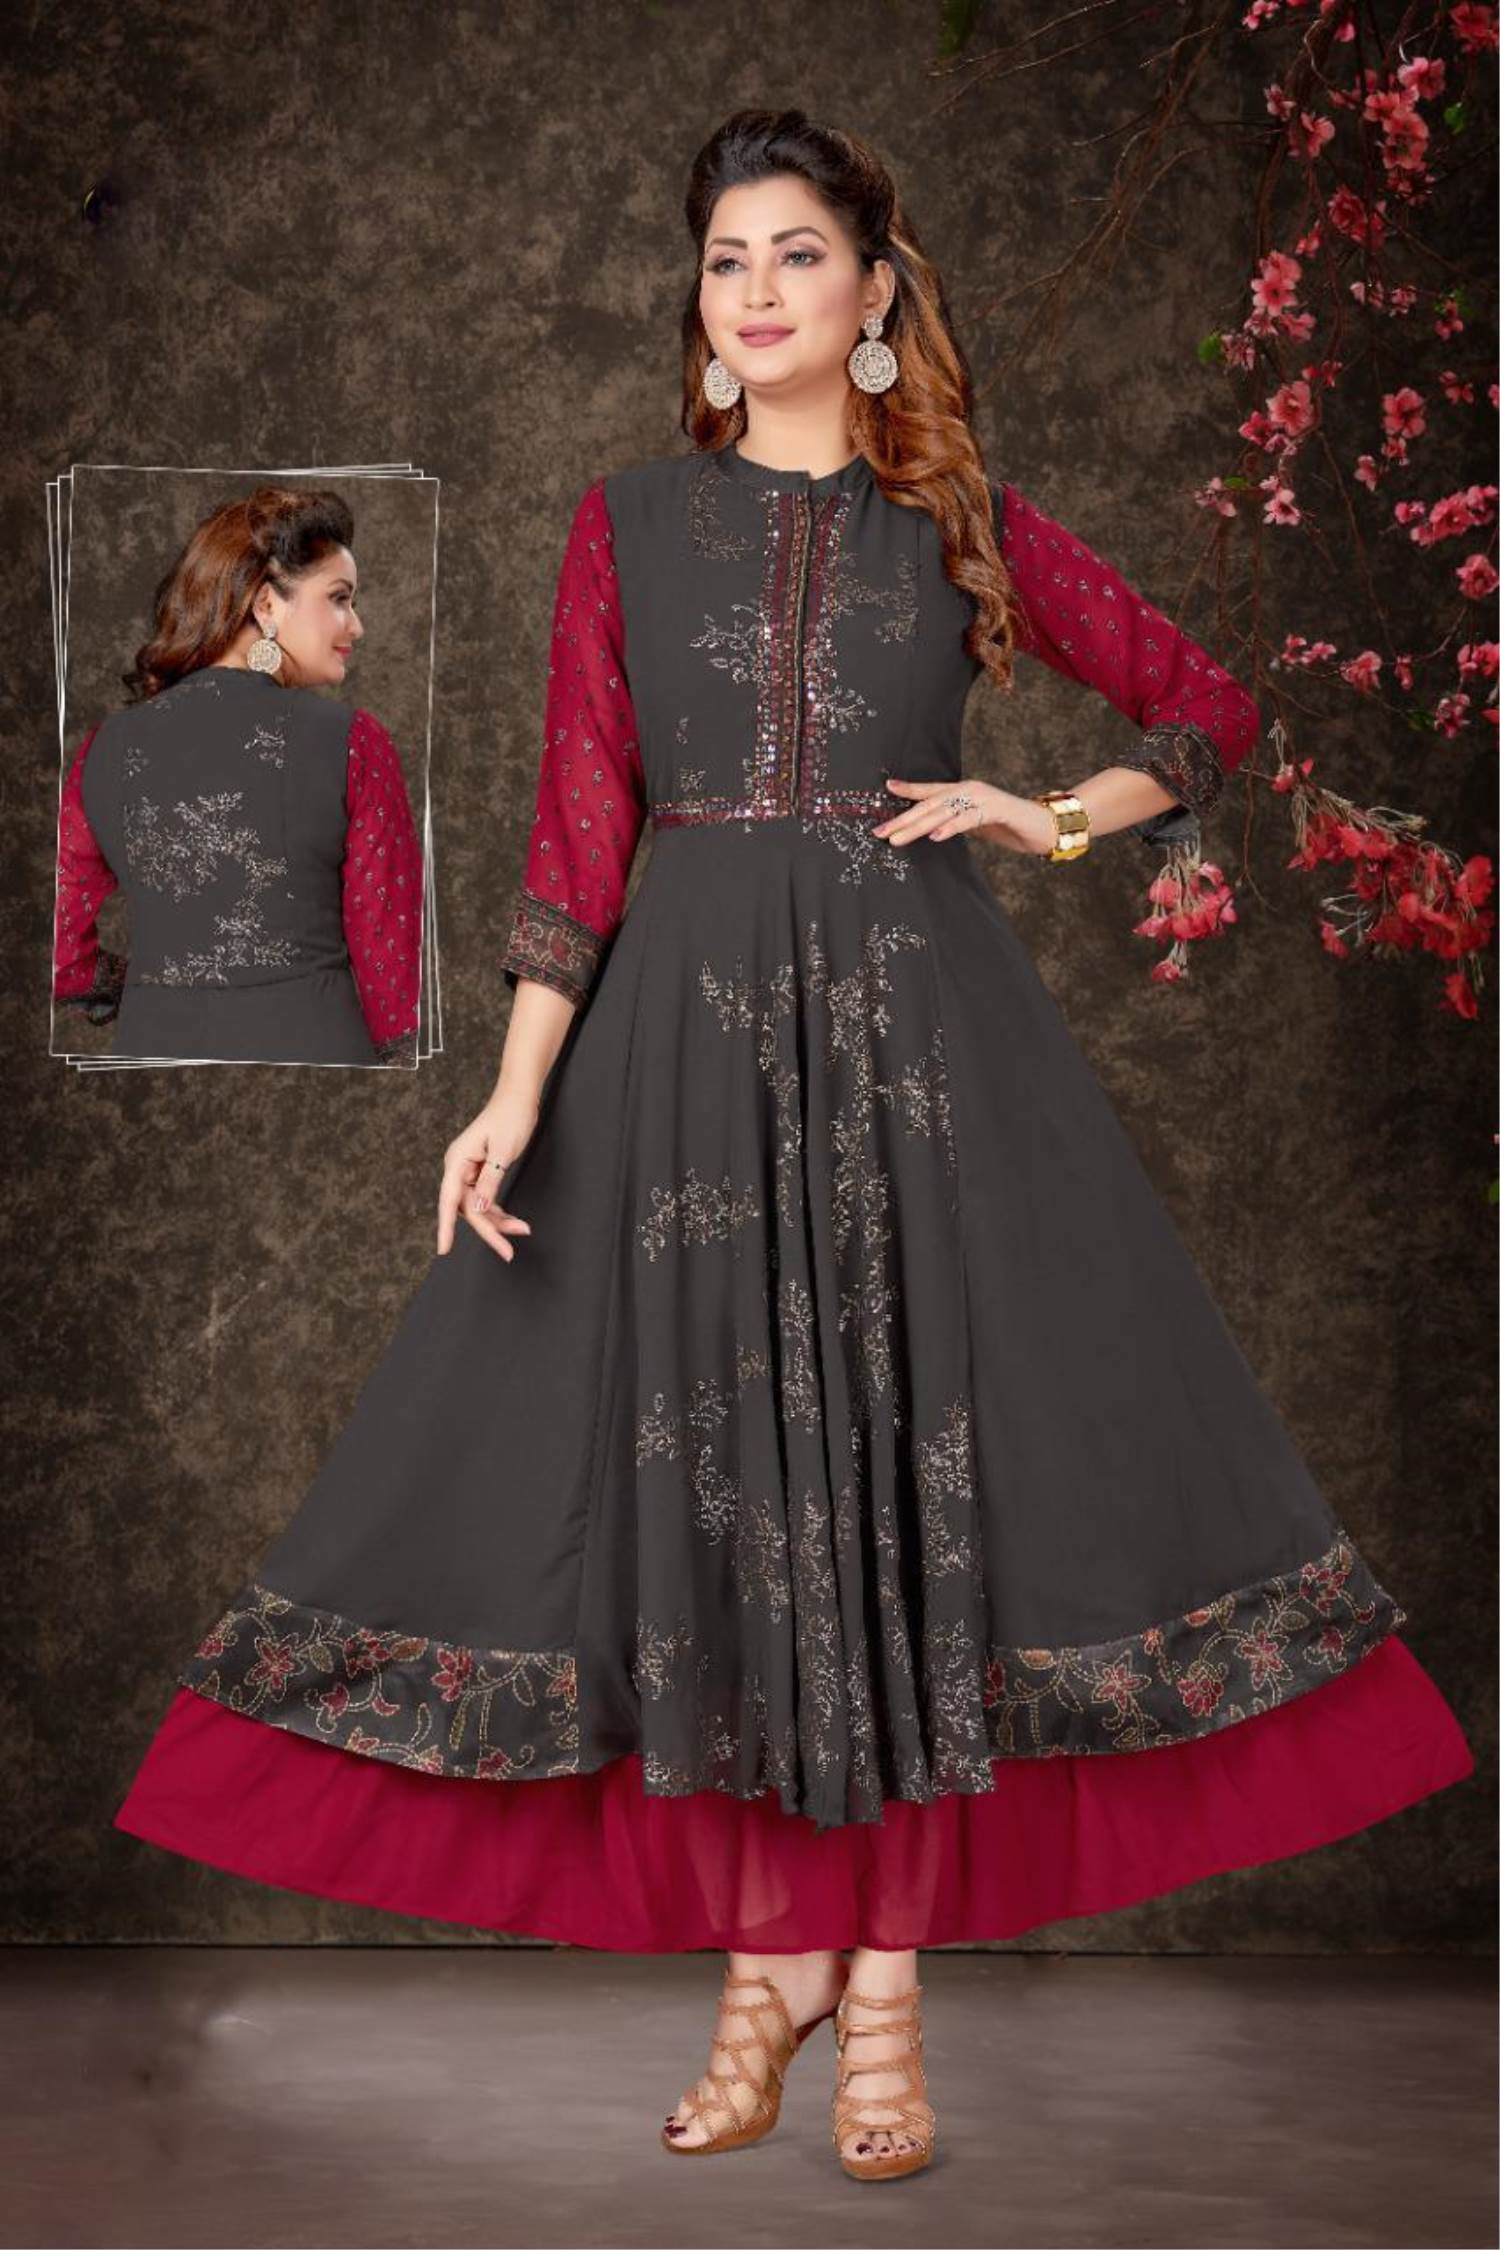 Grey Embroidered With Embellished Cotton Kurti